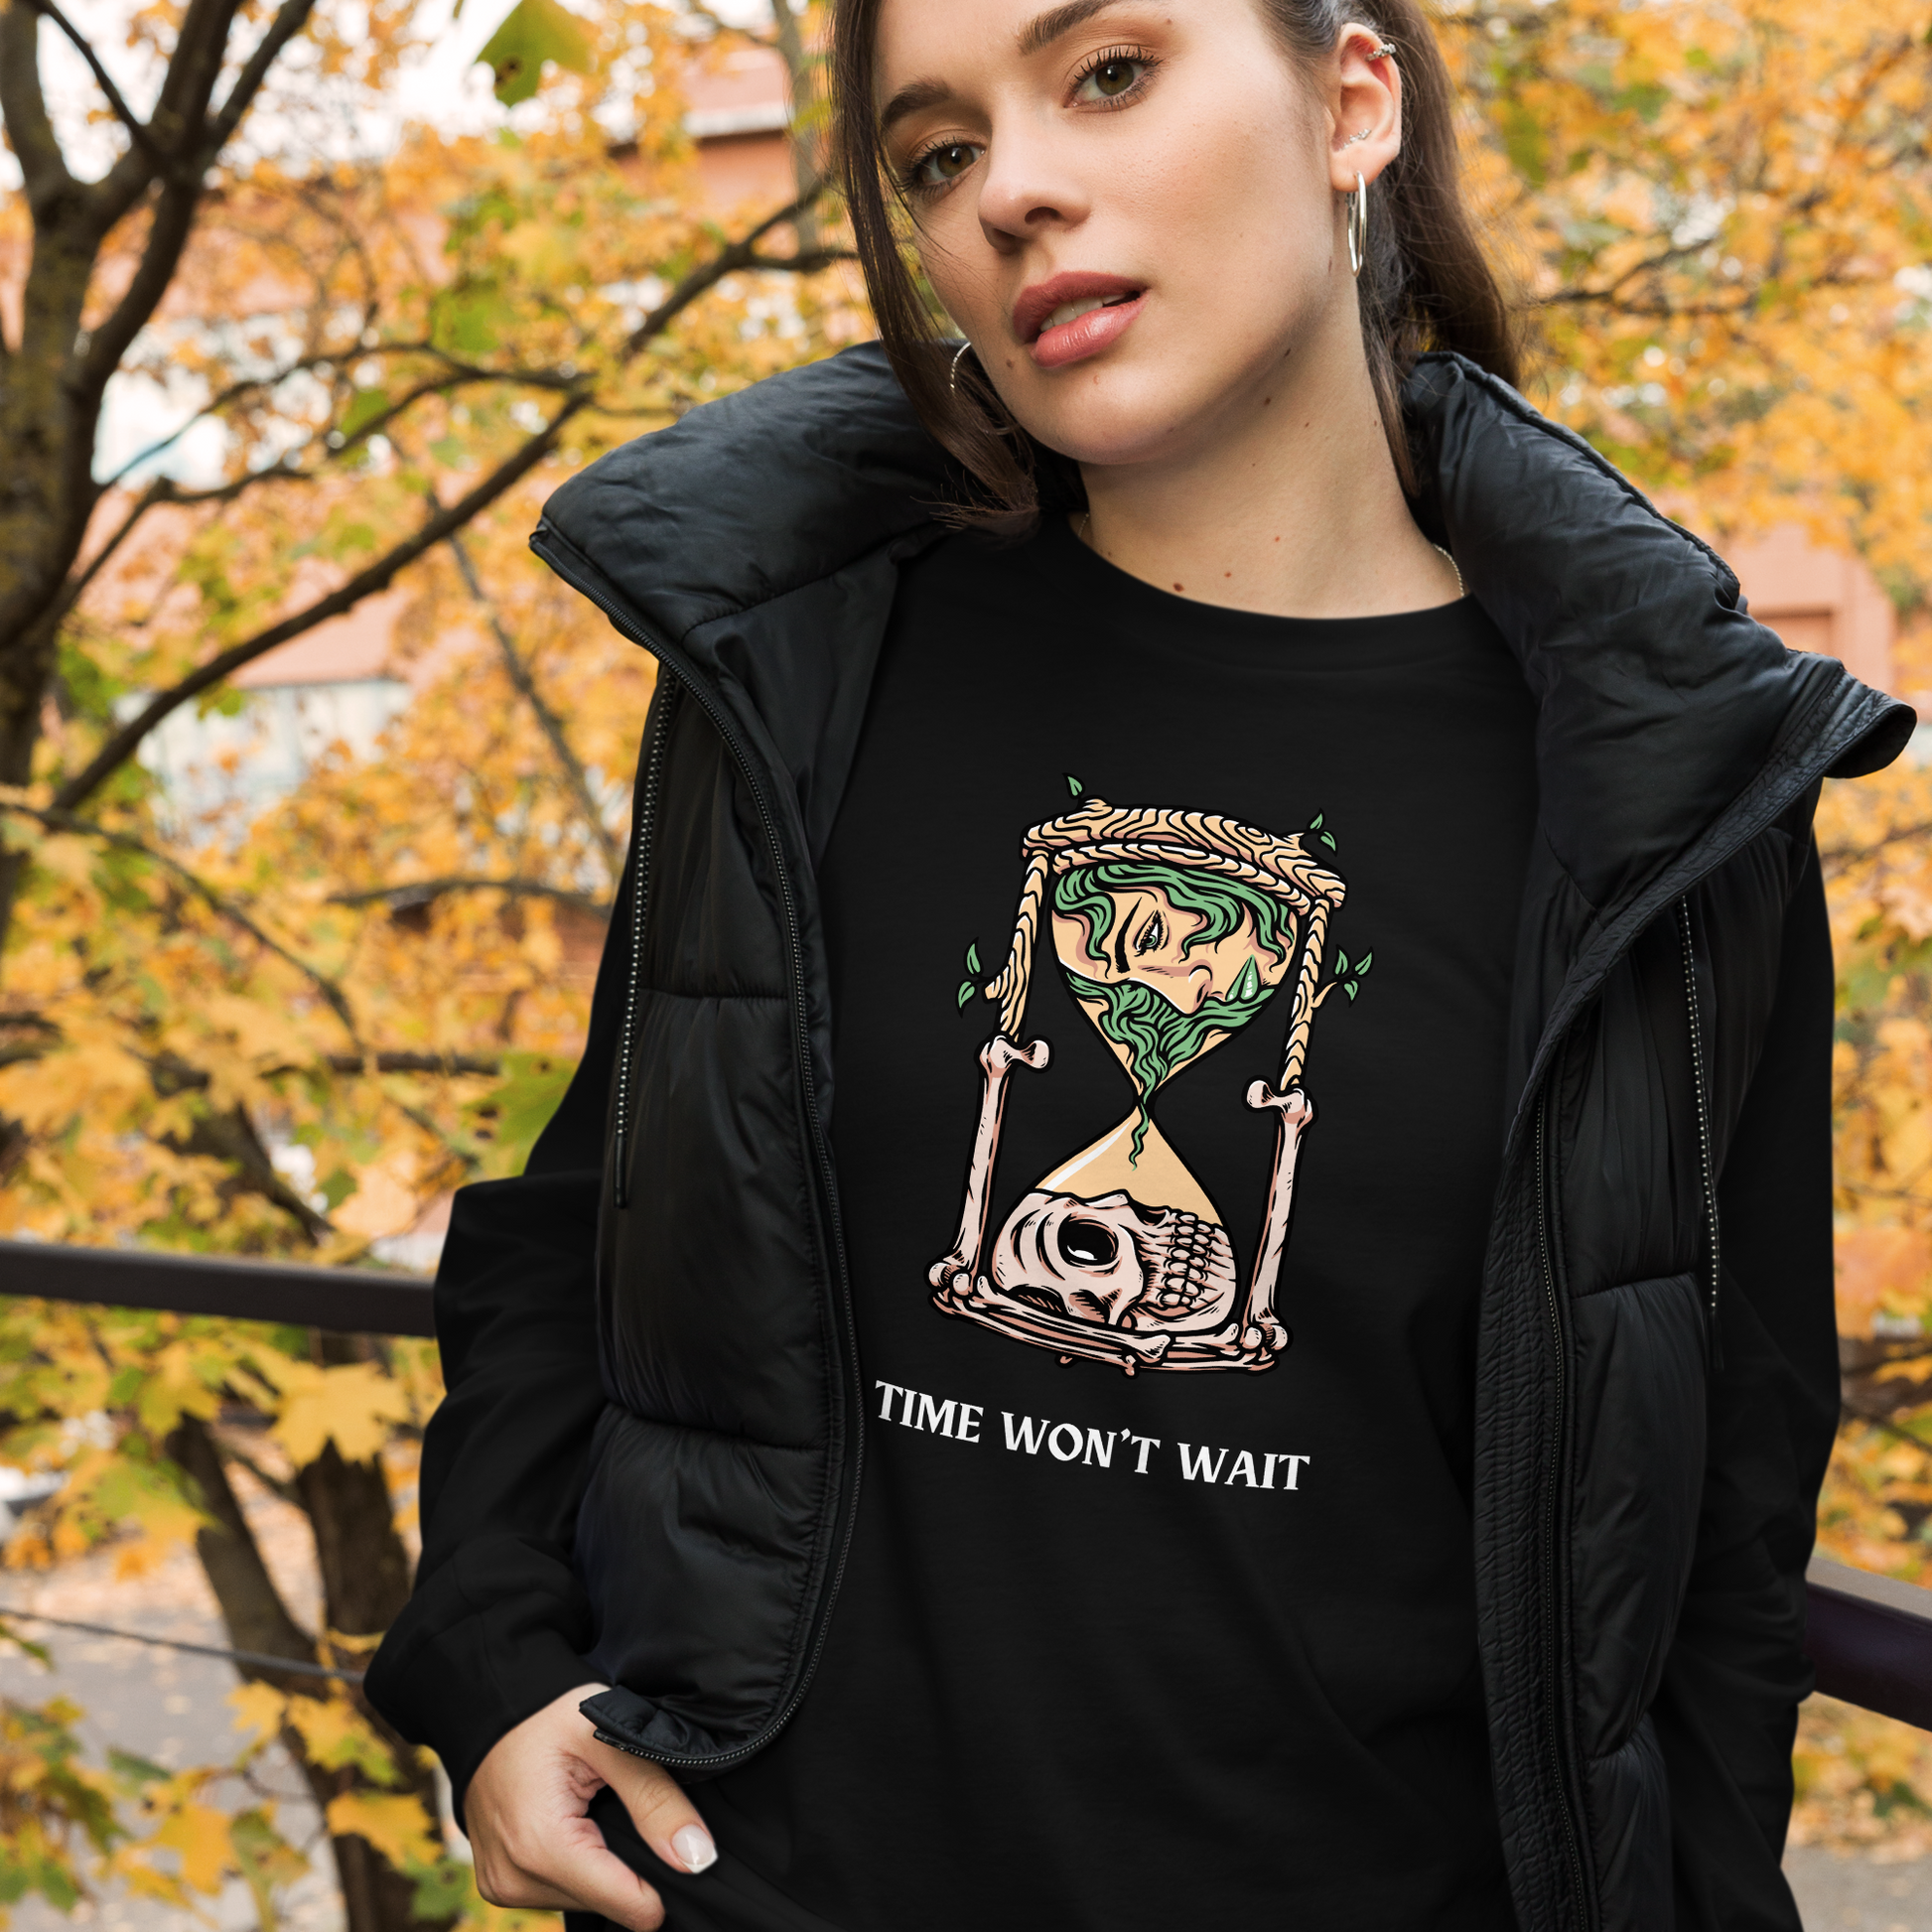 Woman wearing a Black Hourglass Long Sleeve Tee featuring a captivating Time Won't Wait graphic on the chest - Cool Hourglass Long Sleeve Graphic Tees - Boozy Fox